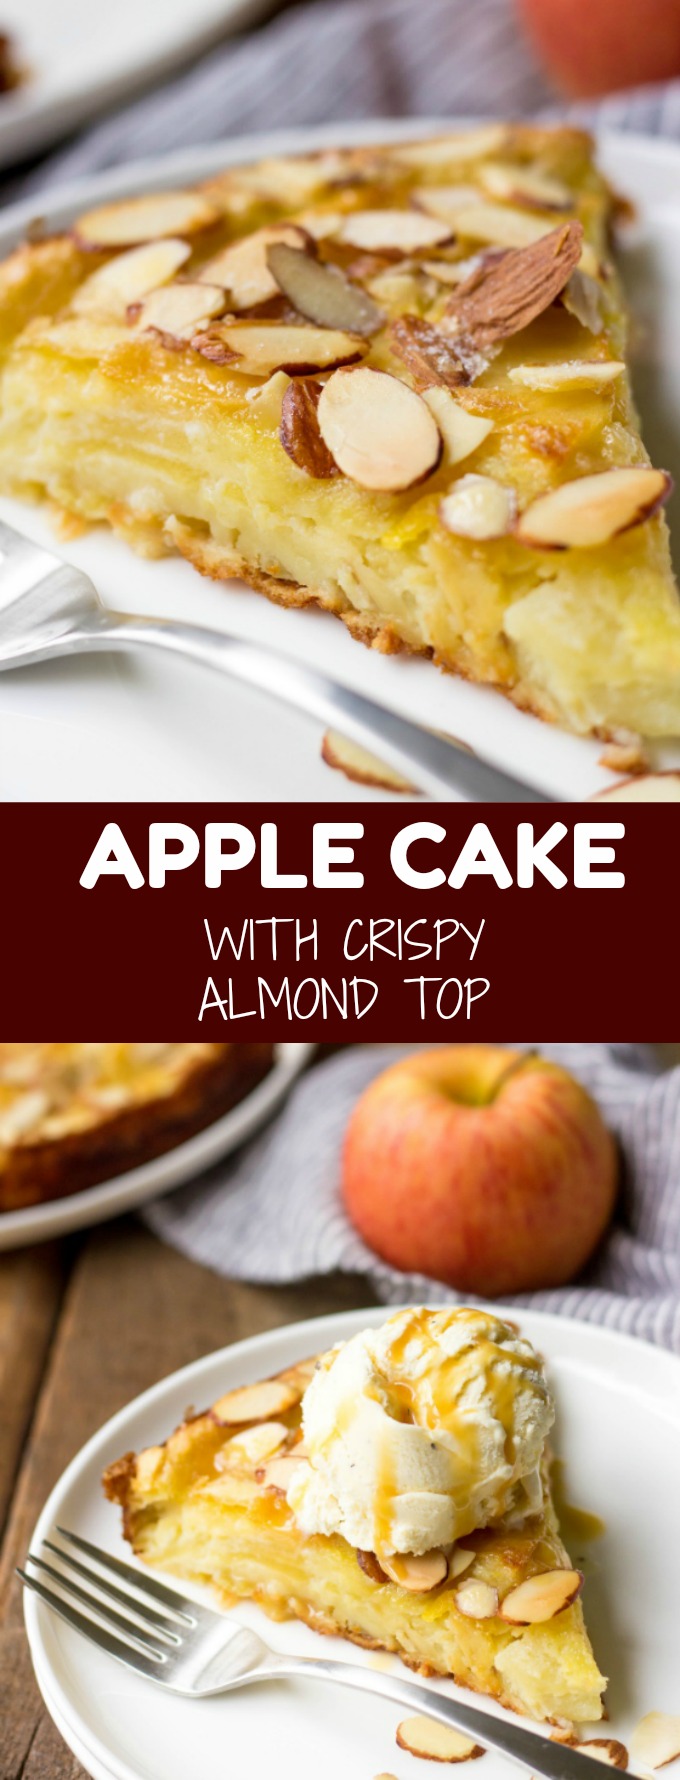 This easy Crispy Almond Top Apple Cake is seriously the best apple cake recipe you'll ever need! With a few healthier twists, you can enjoy this delicious treat without all of the guilt.